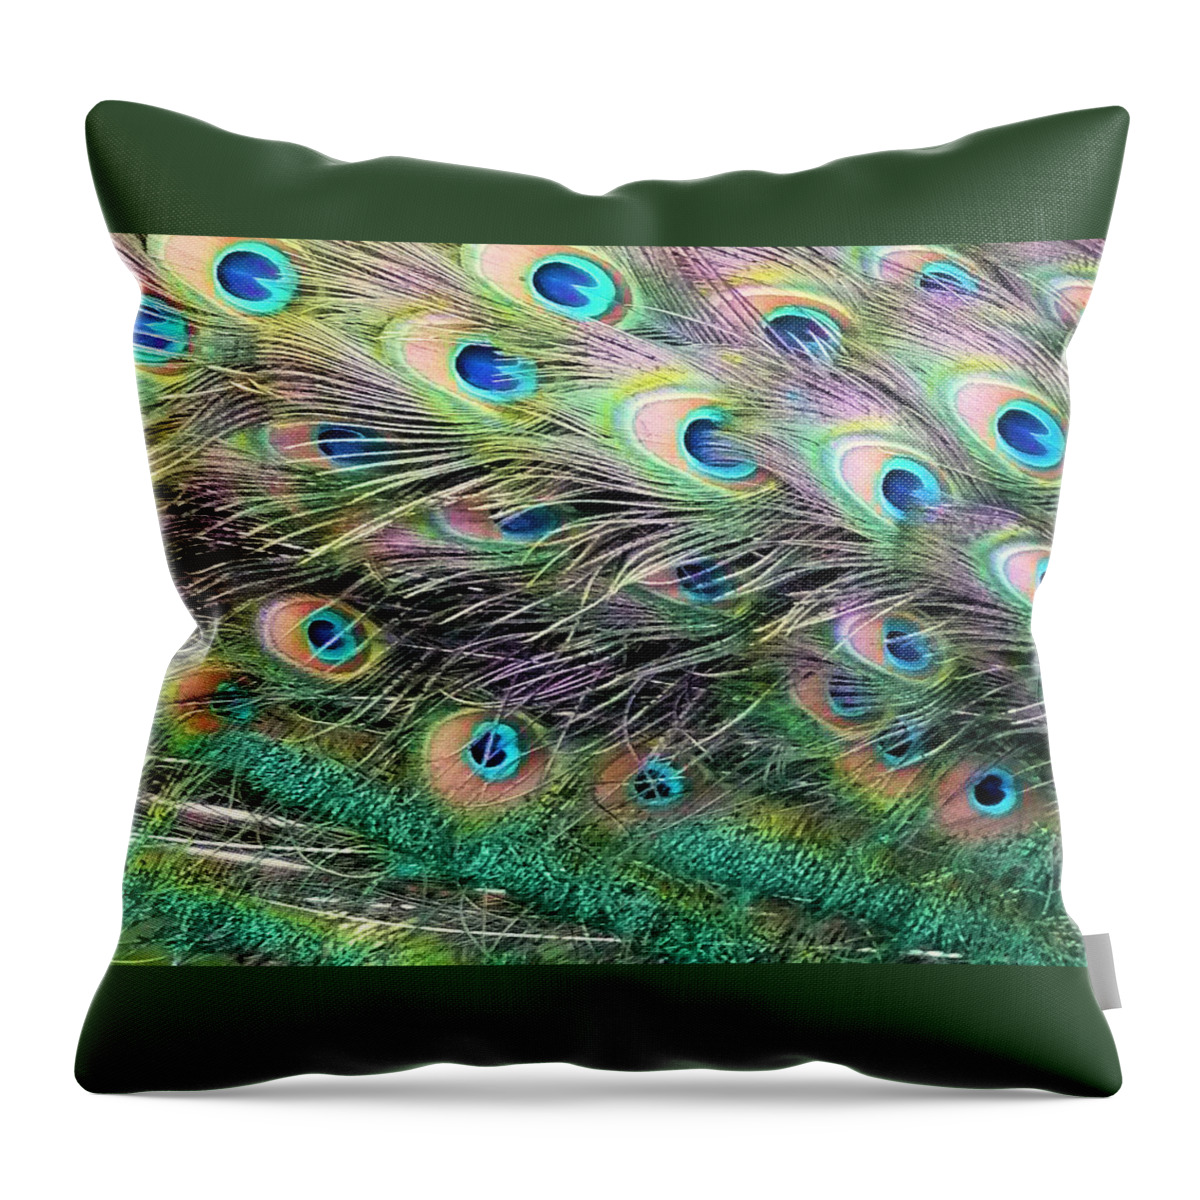 Peacock Throw Pillow featuring the photograph Peacock Feathers by Jane Girardot